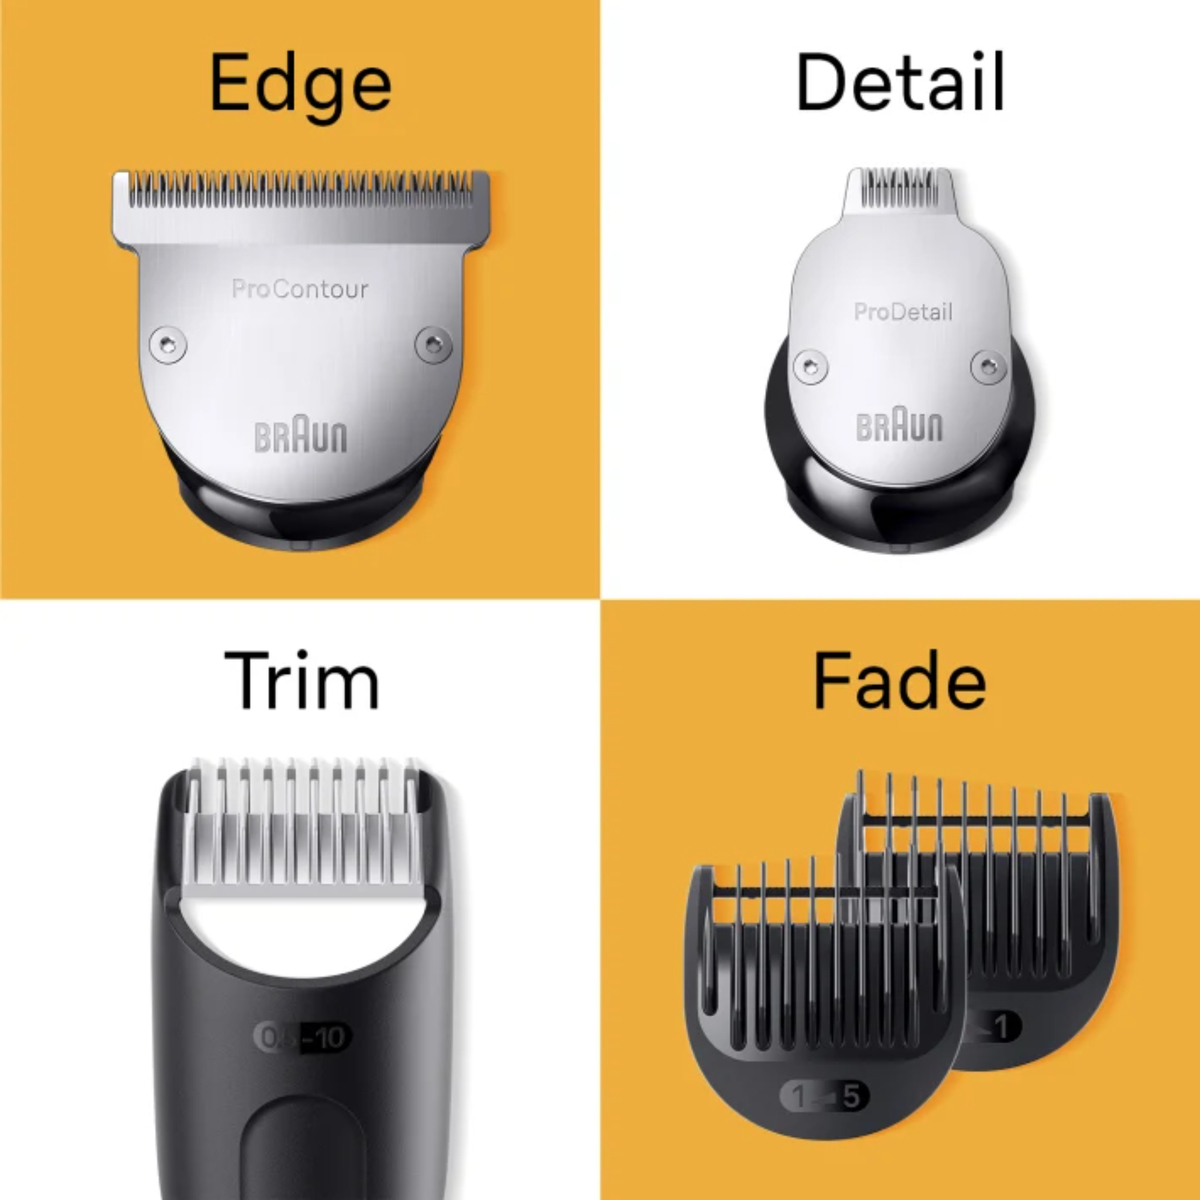 Braun Professional Beard Trimmer with ProBlade and 10 barbering tools, Grey, BT9420